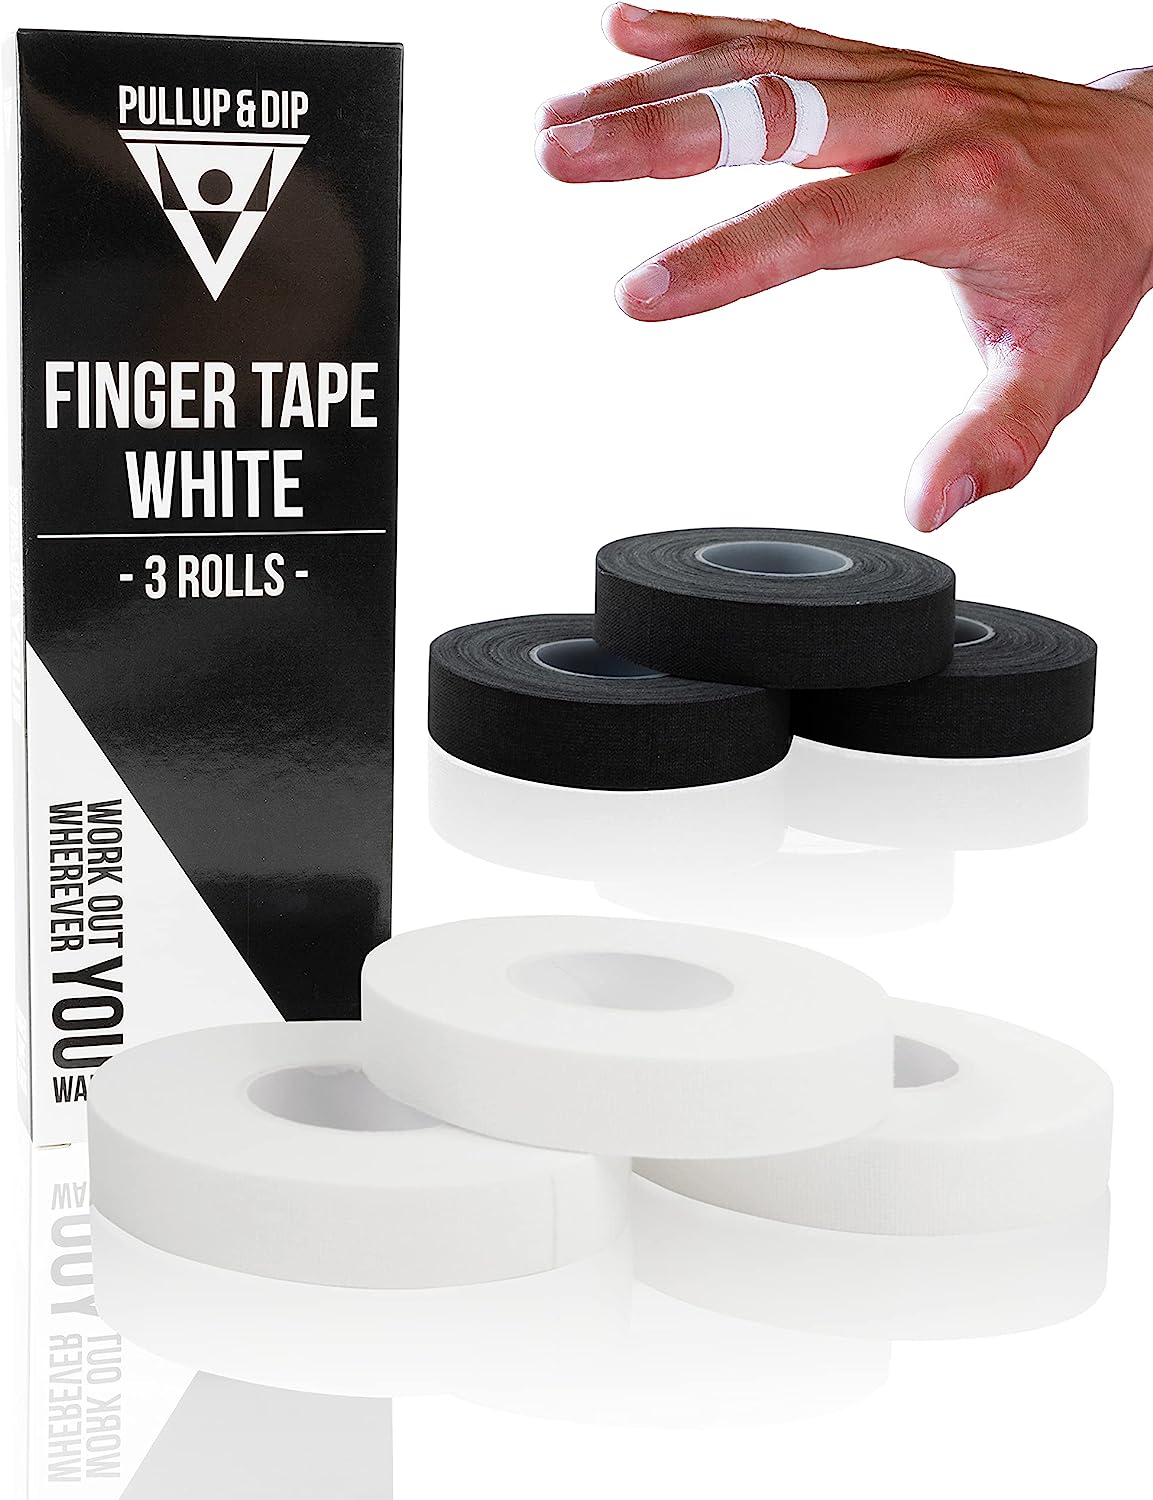 Finger Tape Sports Extra Strong Adhesive, 3 Rolls [...]